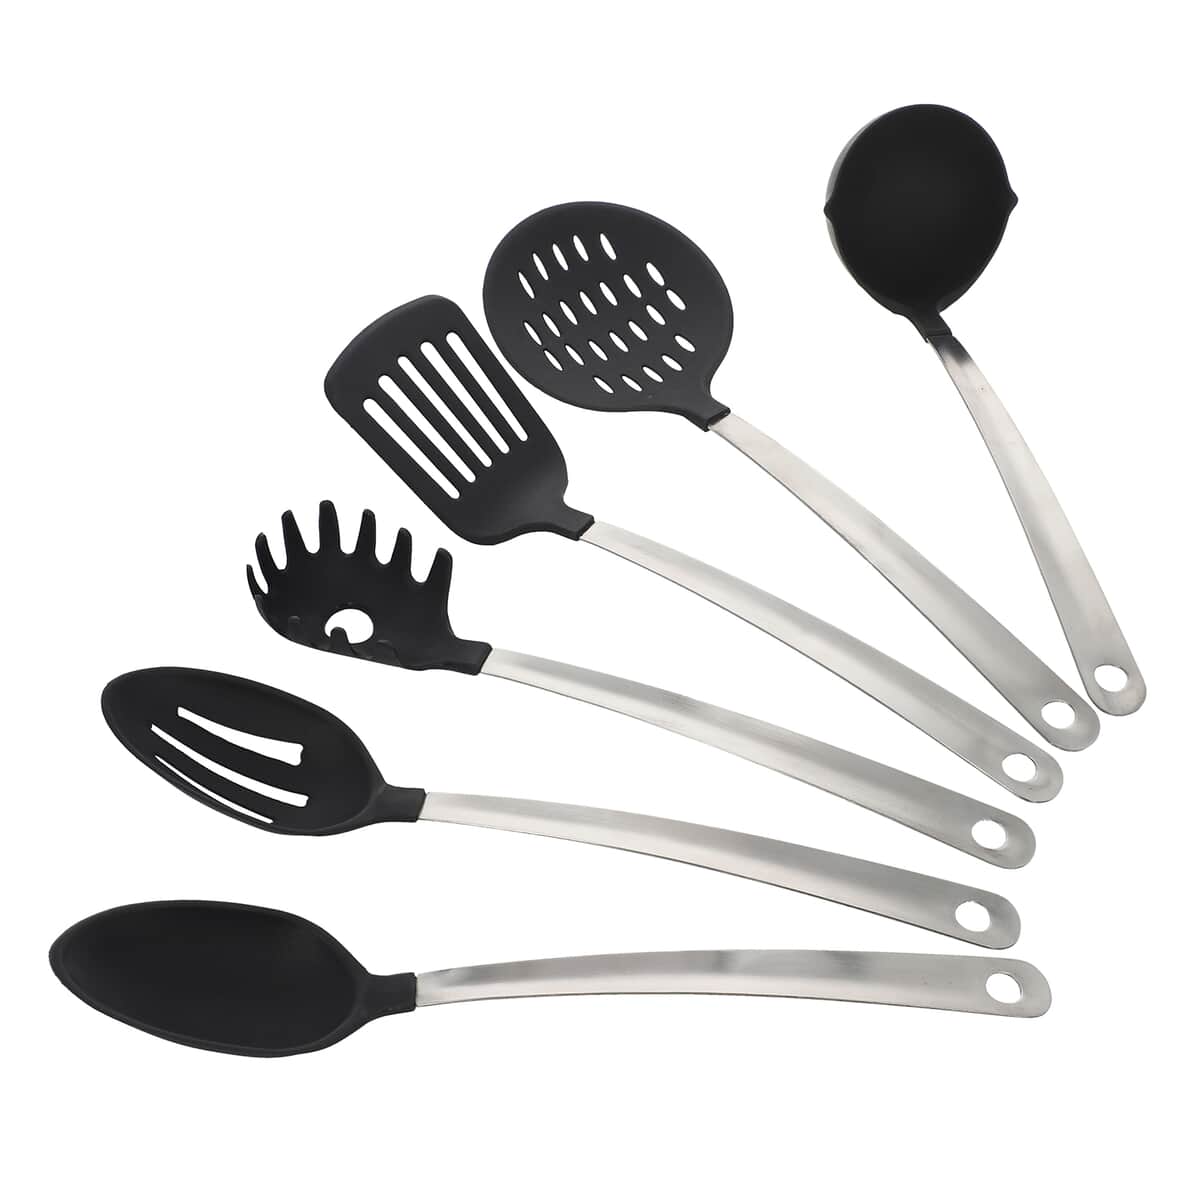 Set of 6 Stainless Steel with Nylon on The Top Laddle, Spaghetti Spoon, Slotted Turner, Slotted Spoon, Basting Spoon, Skimmer image number 0